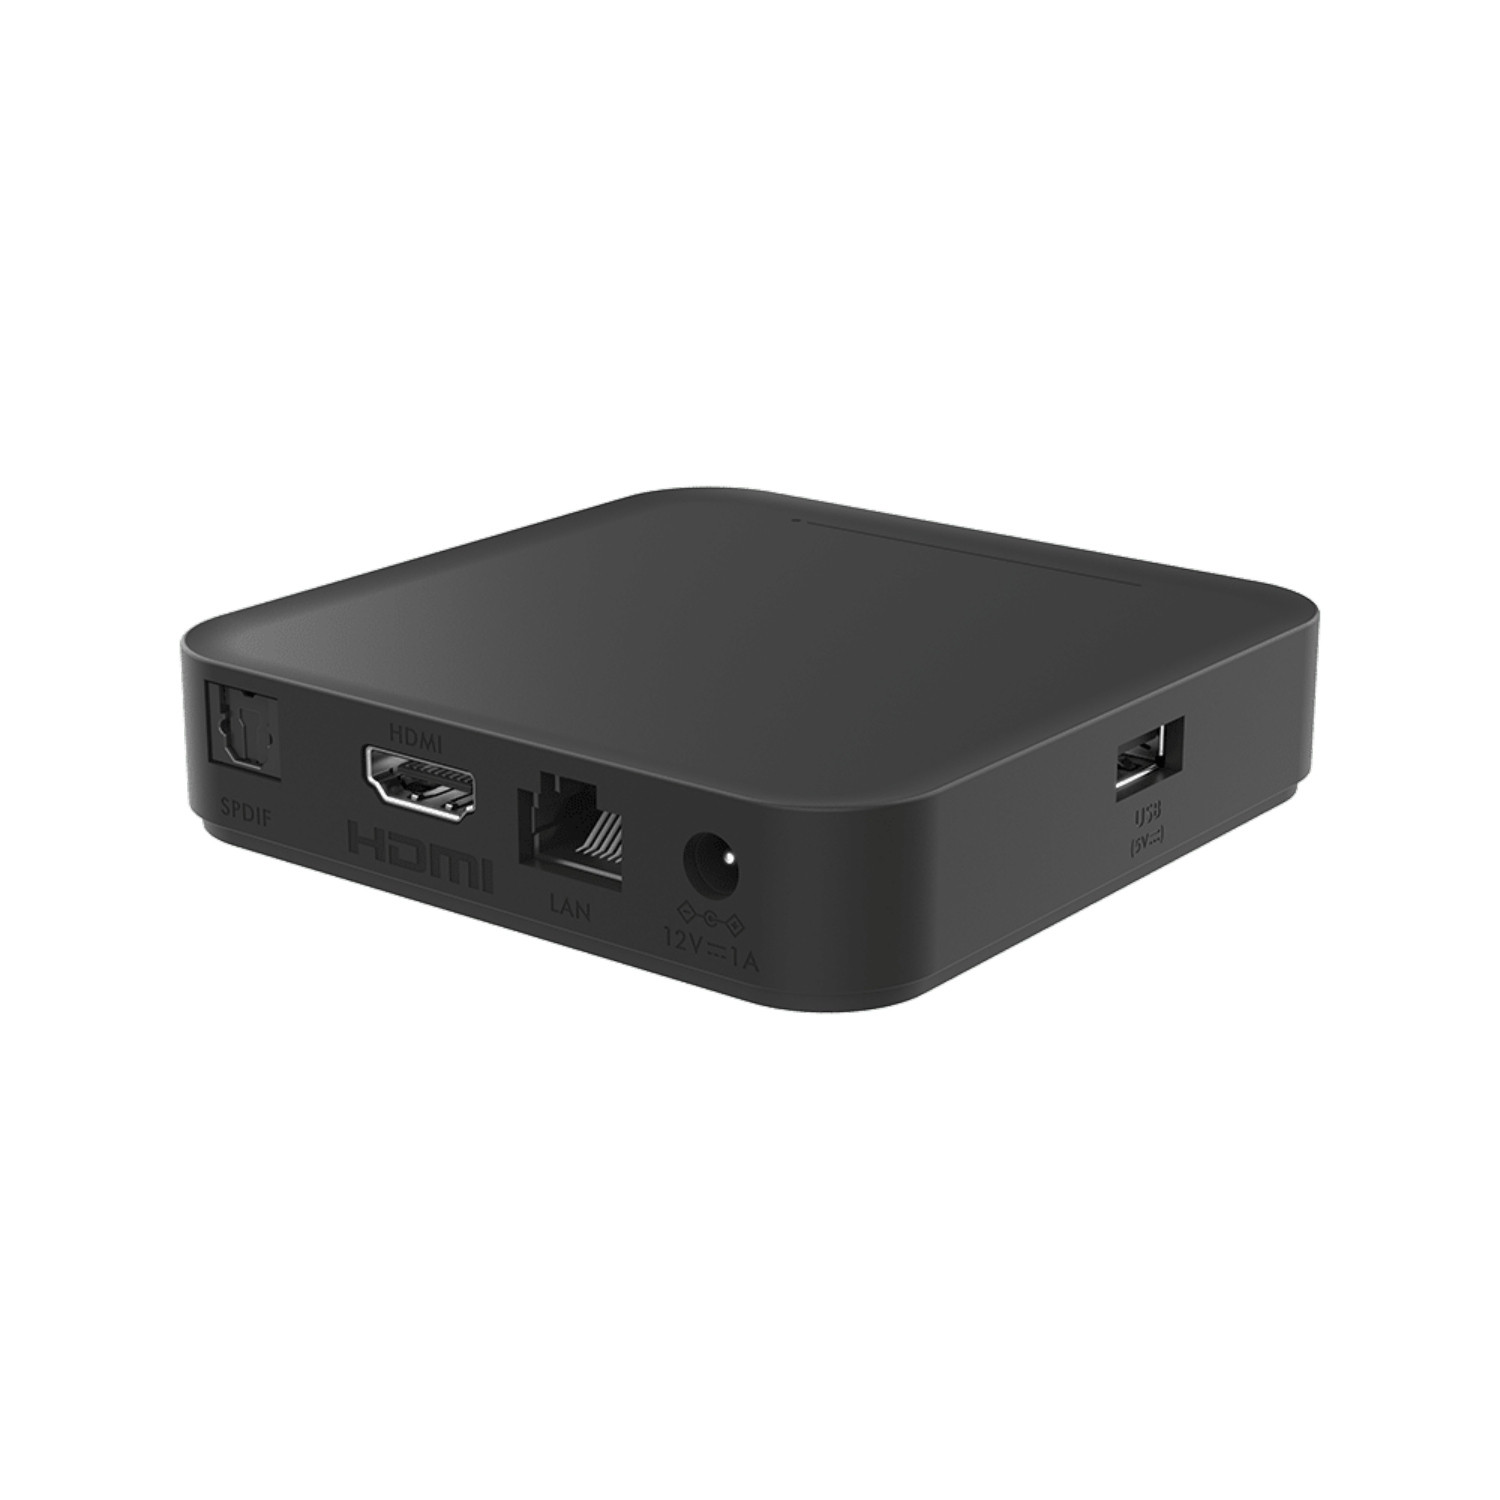 Strong LEAP-S3 Android TV Box 4K UHD - electronic4you Slovenija